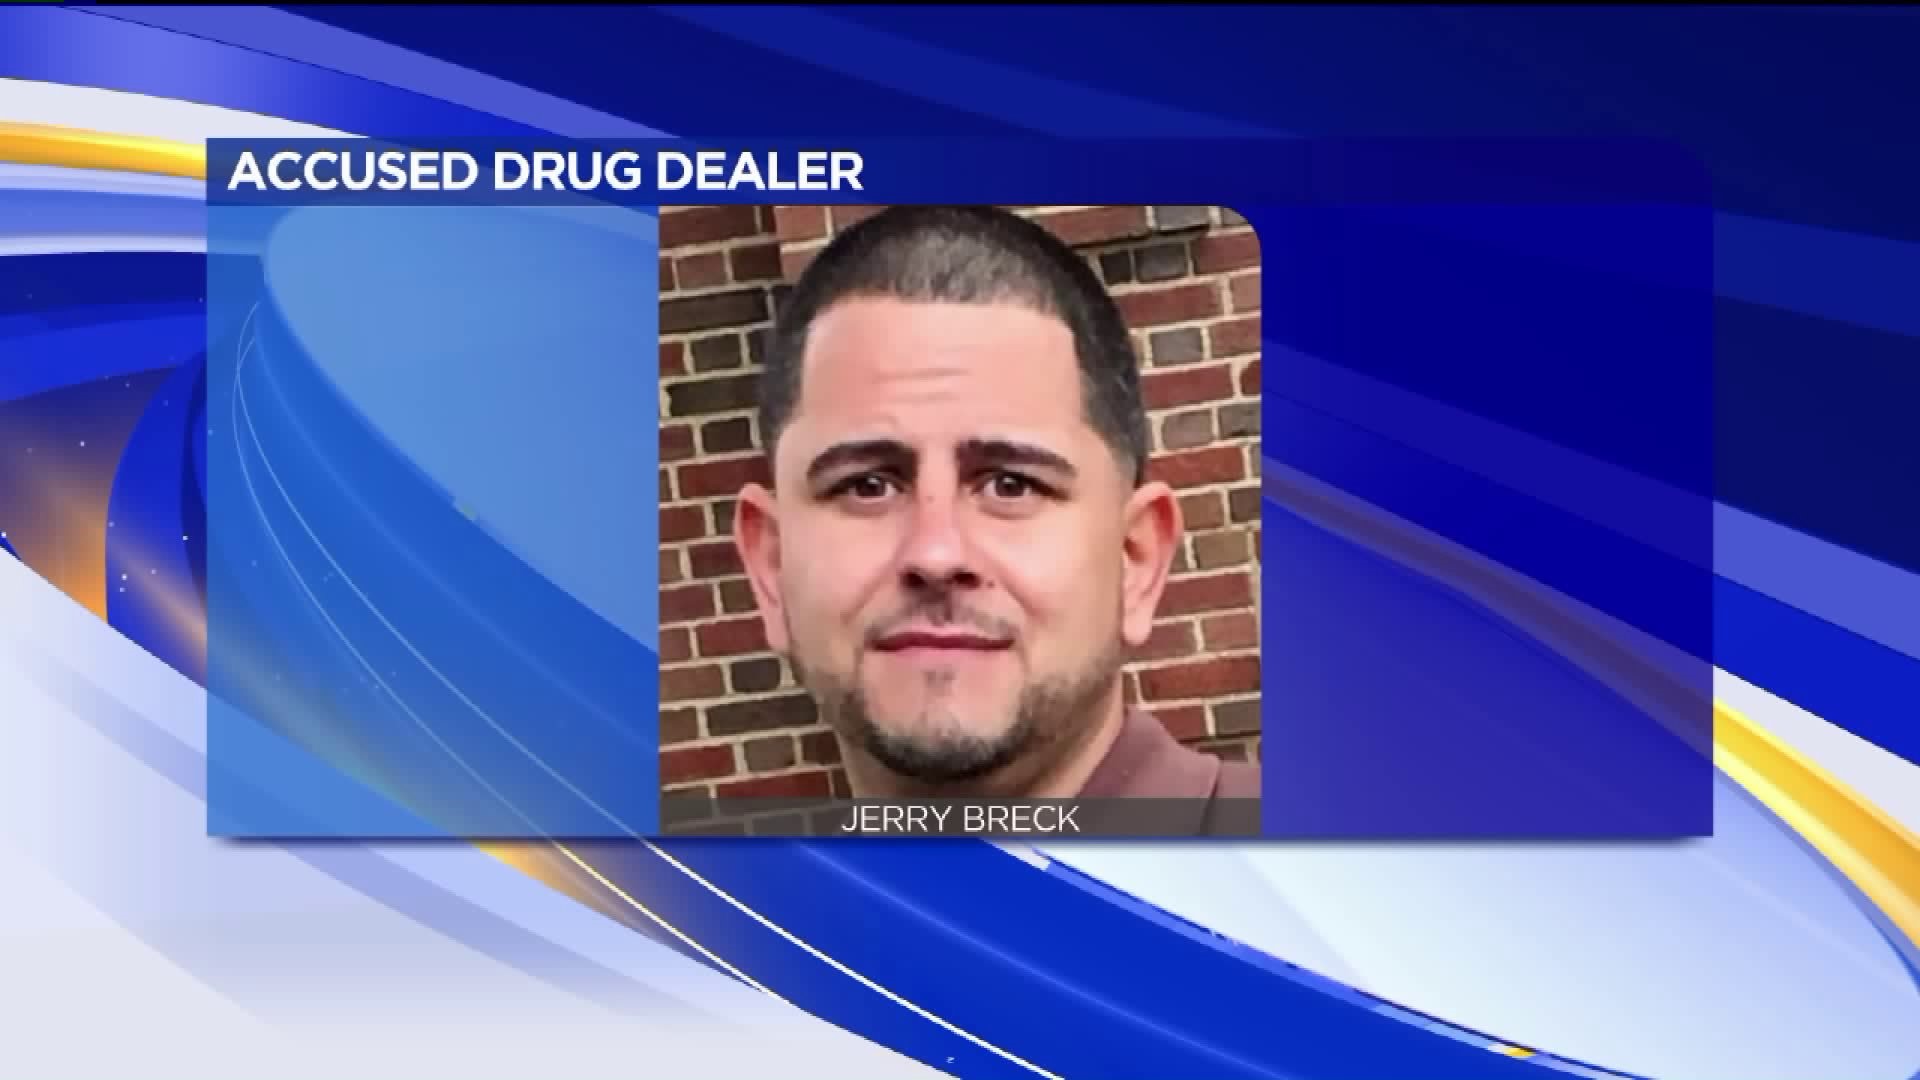 Man Behind Bars After "Largest Drug Bust in Borough History" in Schuylkill County